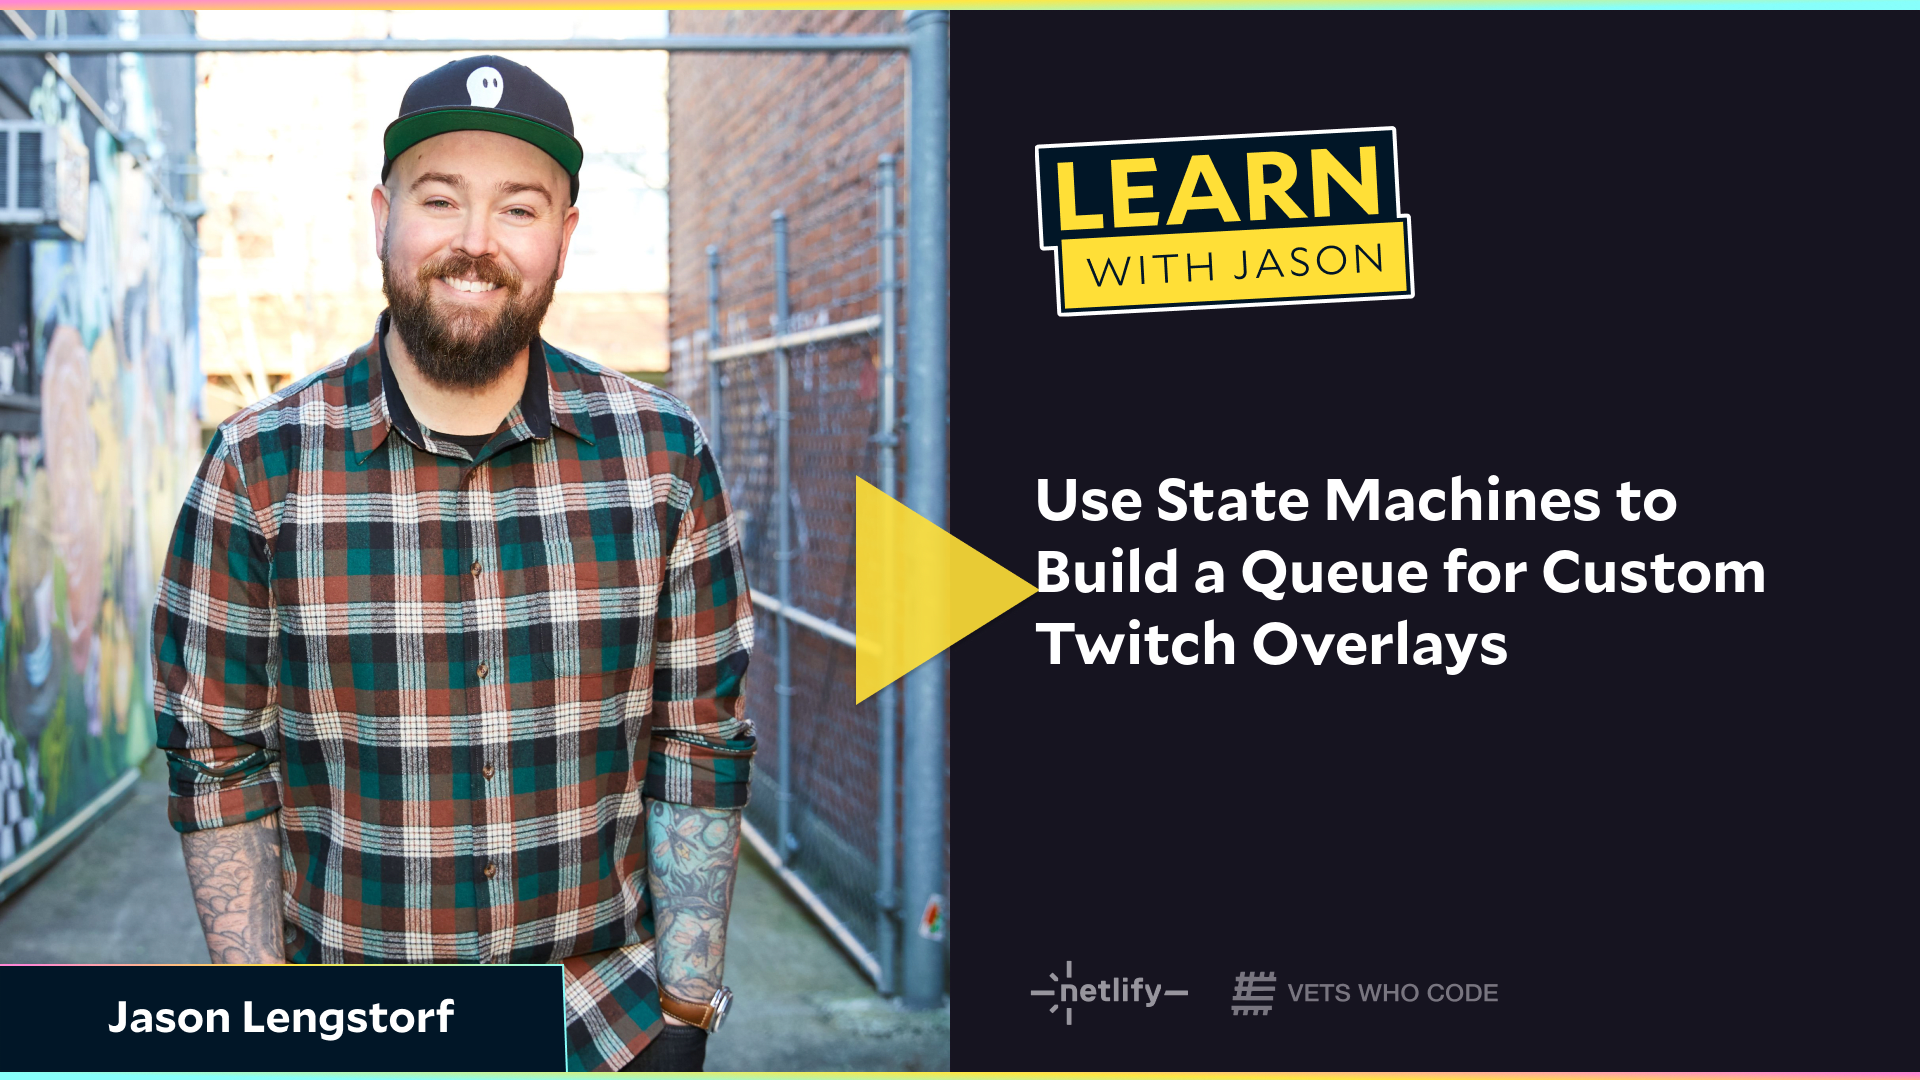 Use State Machines to Build a Queue for Custom Twitch Overlays (with Jason Lengstorf)